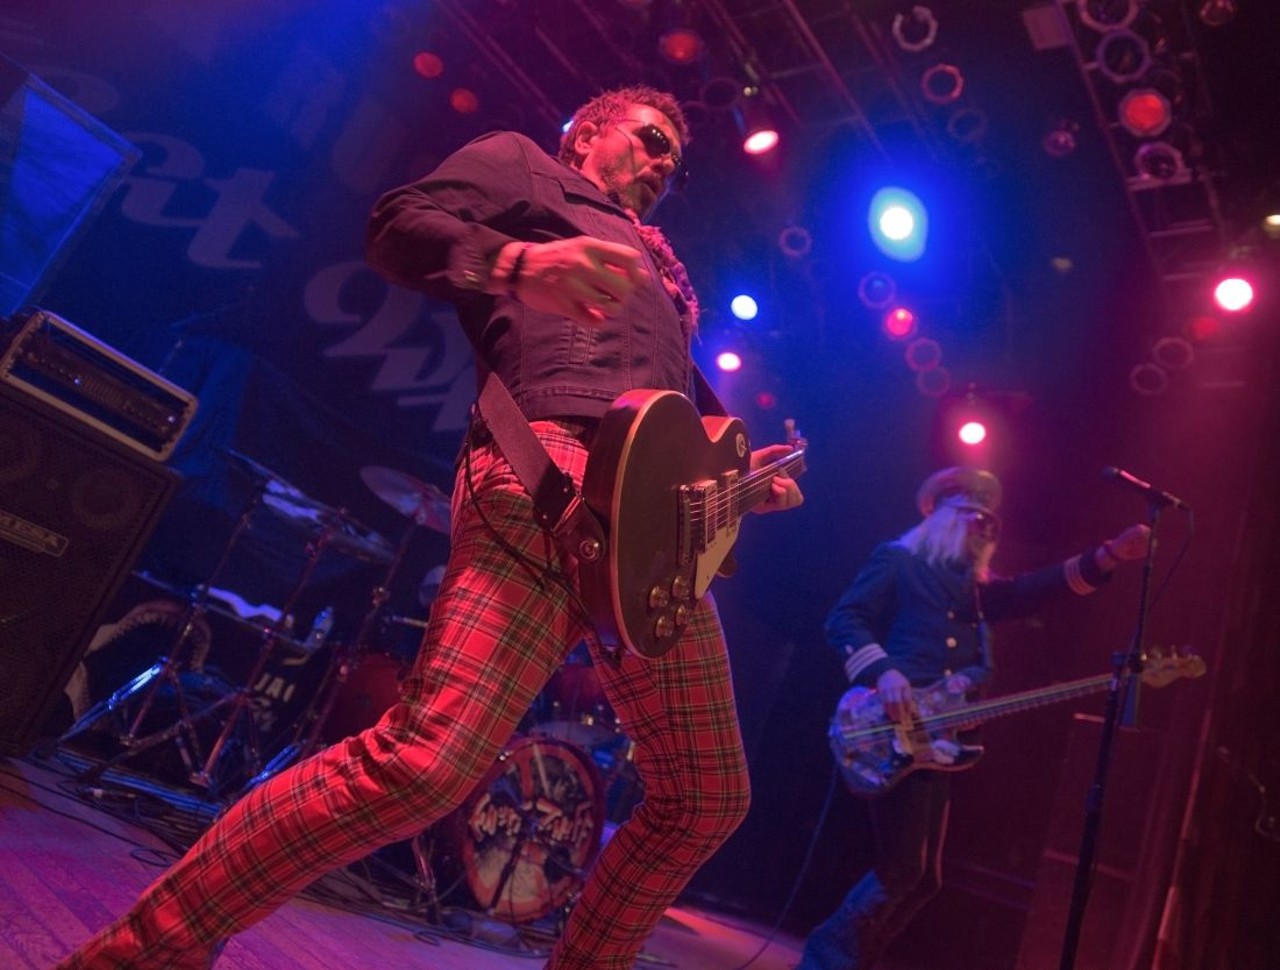 Enuff Z'nuff, Jack Russell's Great White & the Bullet Boys Performing at House of Blues